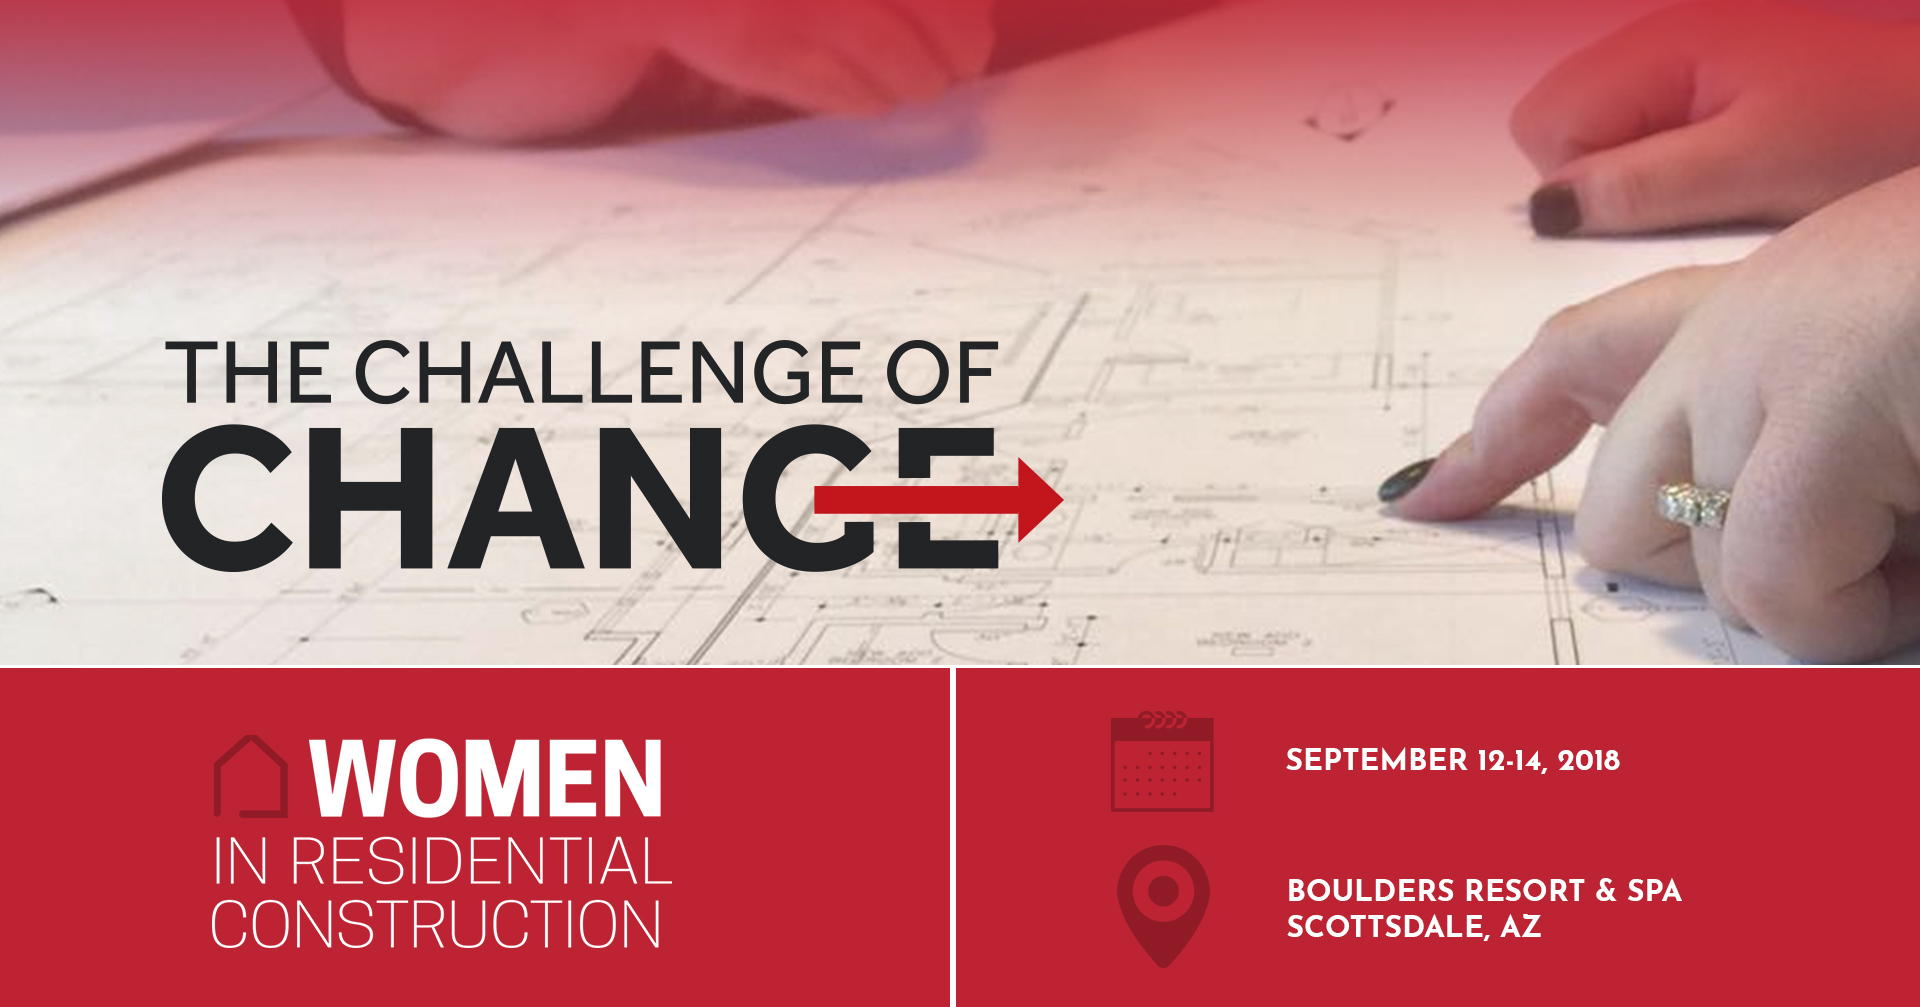 Women in Residential Construction / The Challenge Of Change